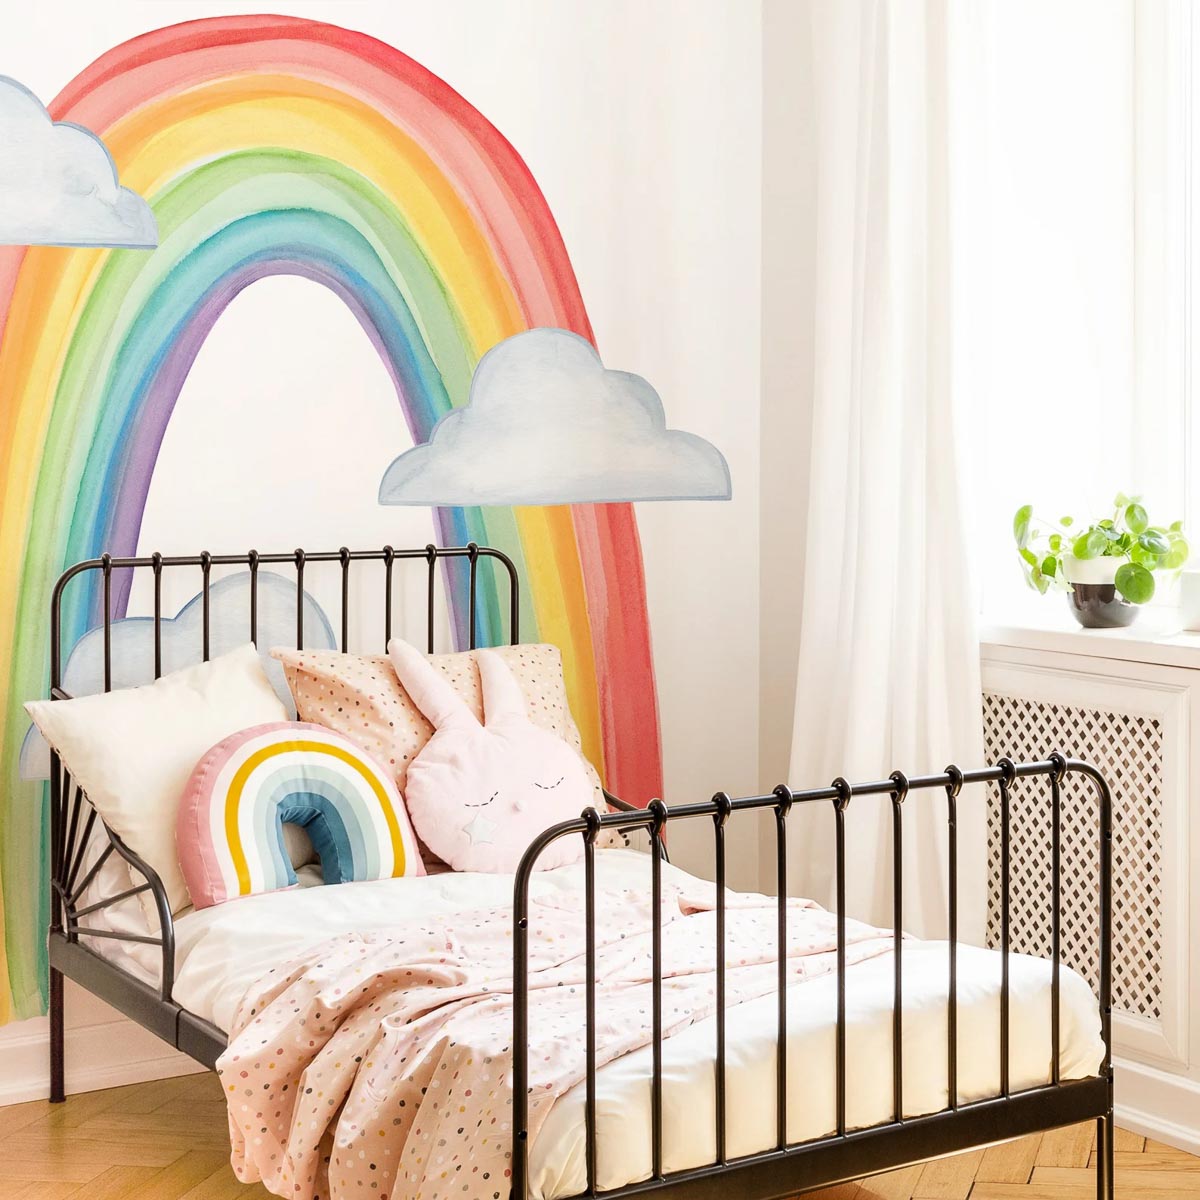 Love this large rainbow decal as above bed decor